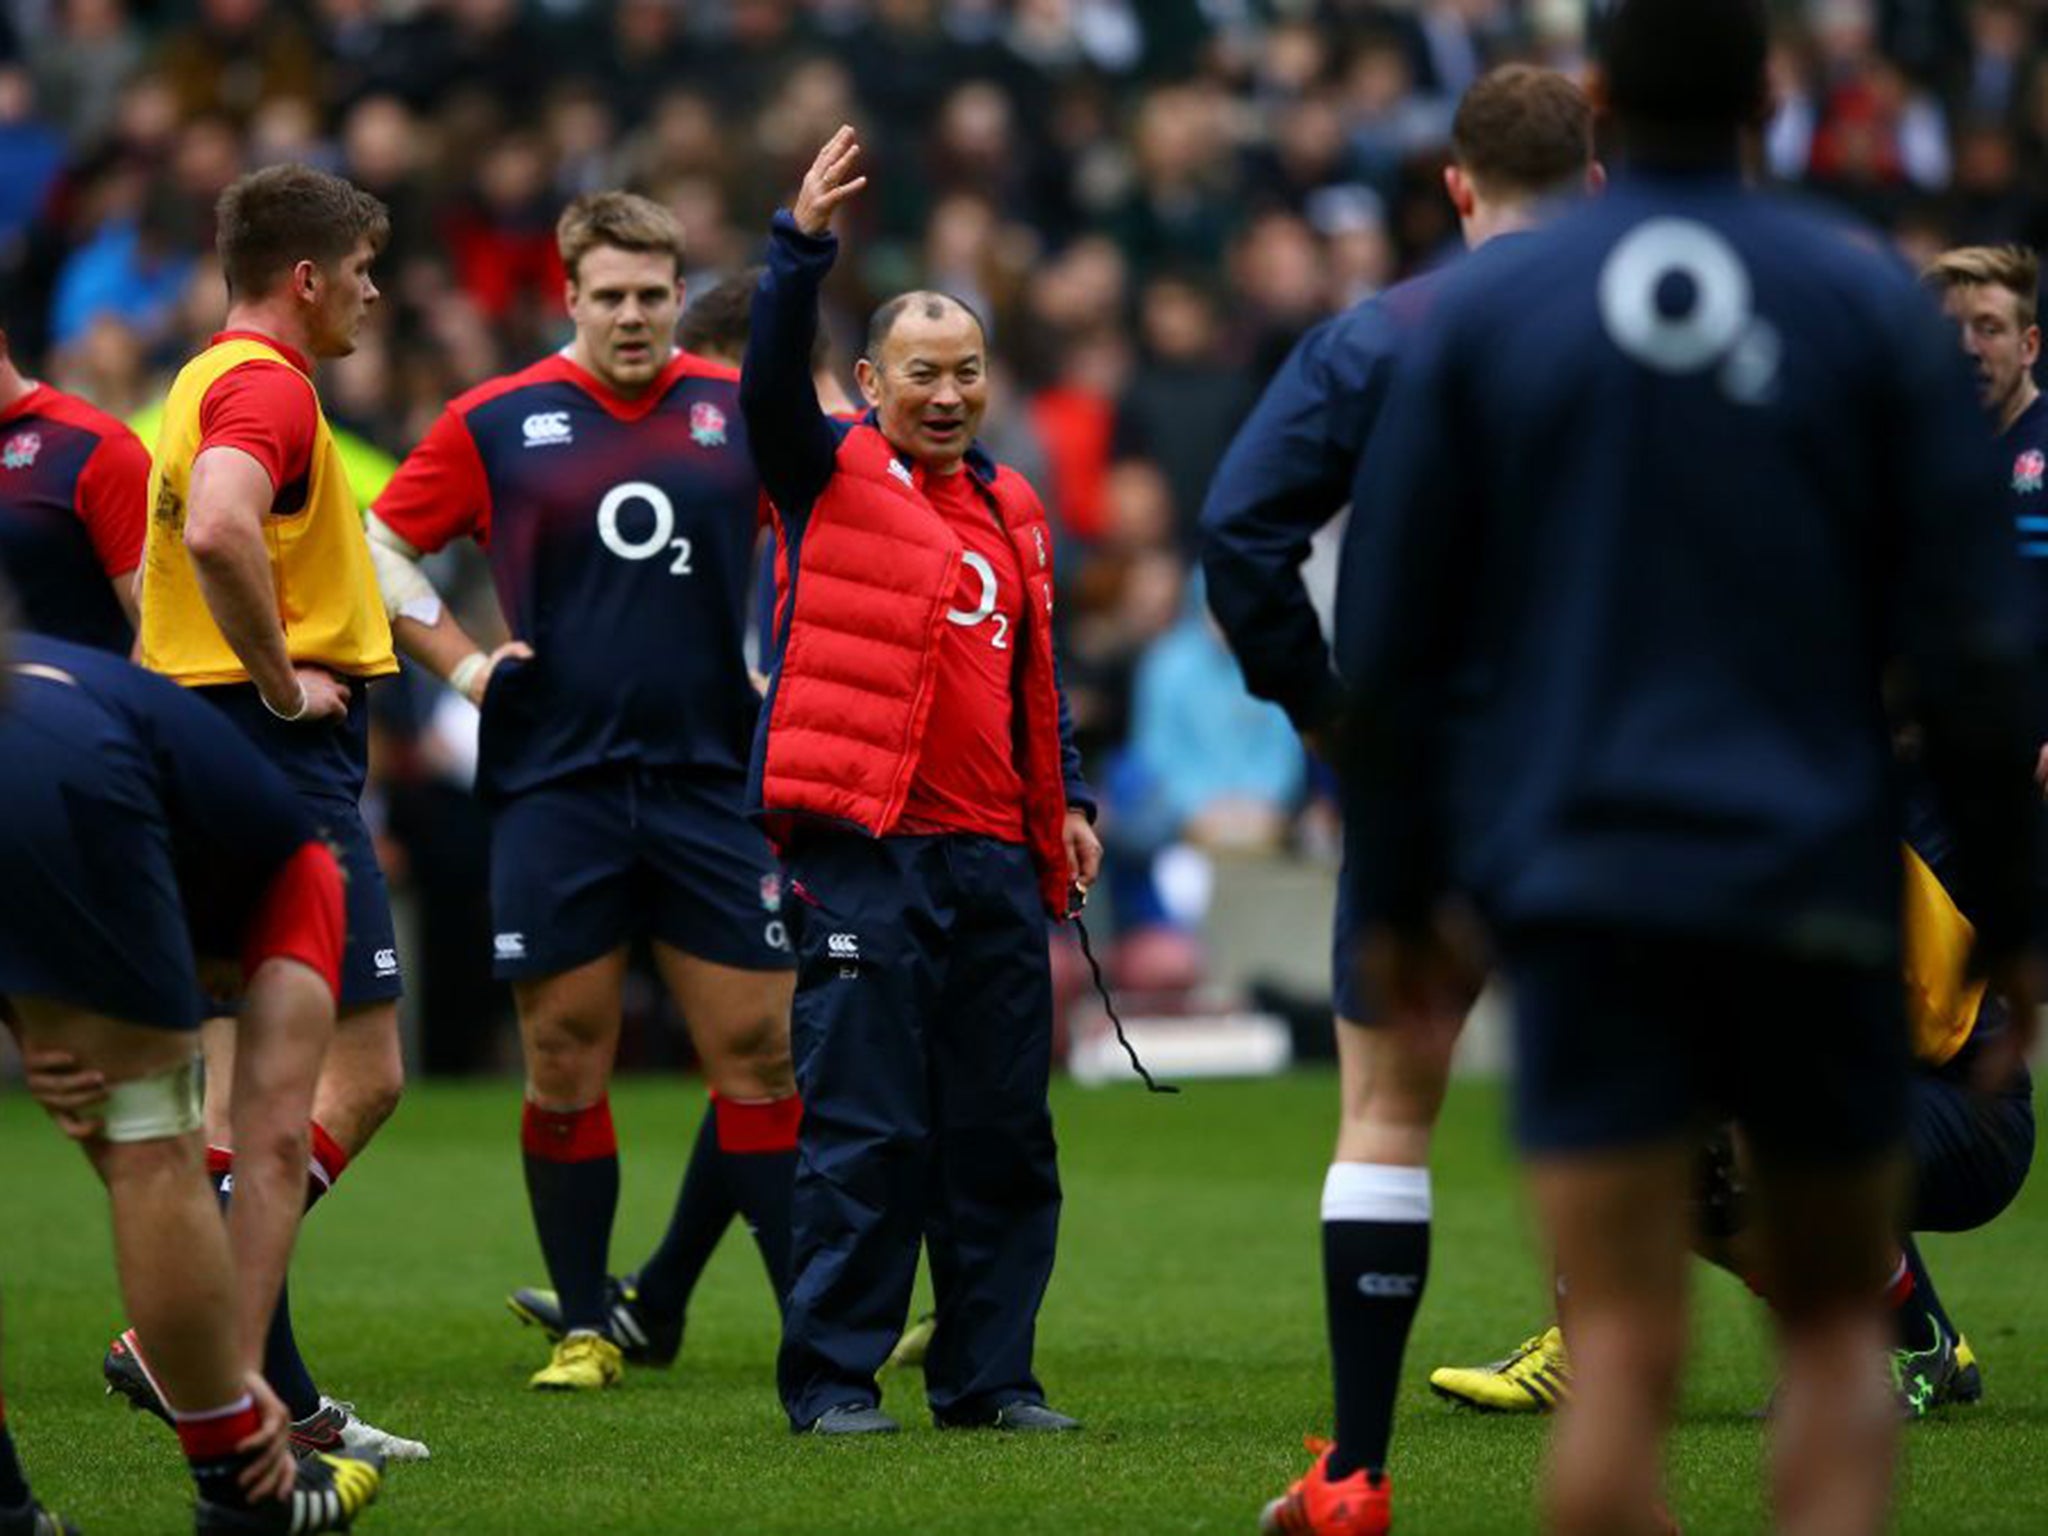 Eddie Jones takes an open training session with his England players at Twickenham